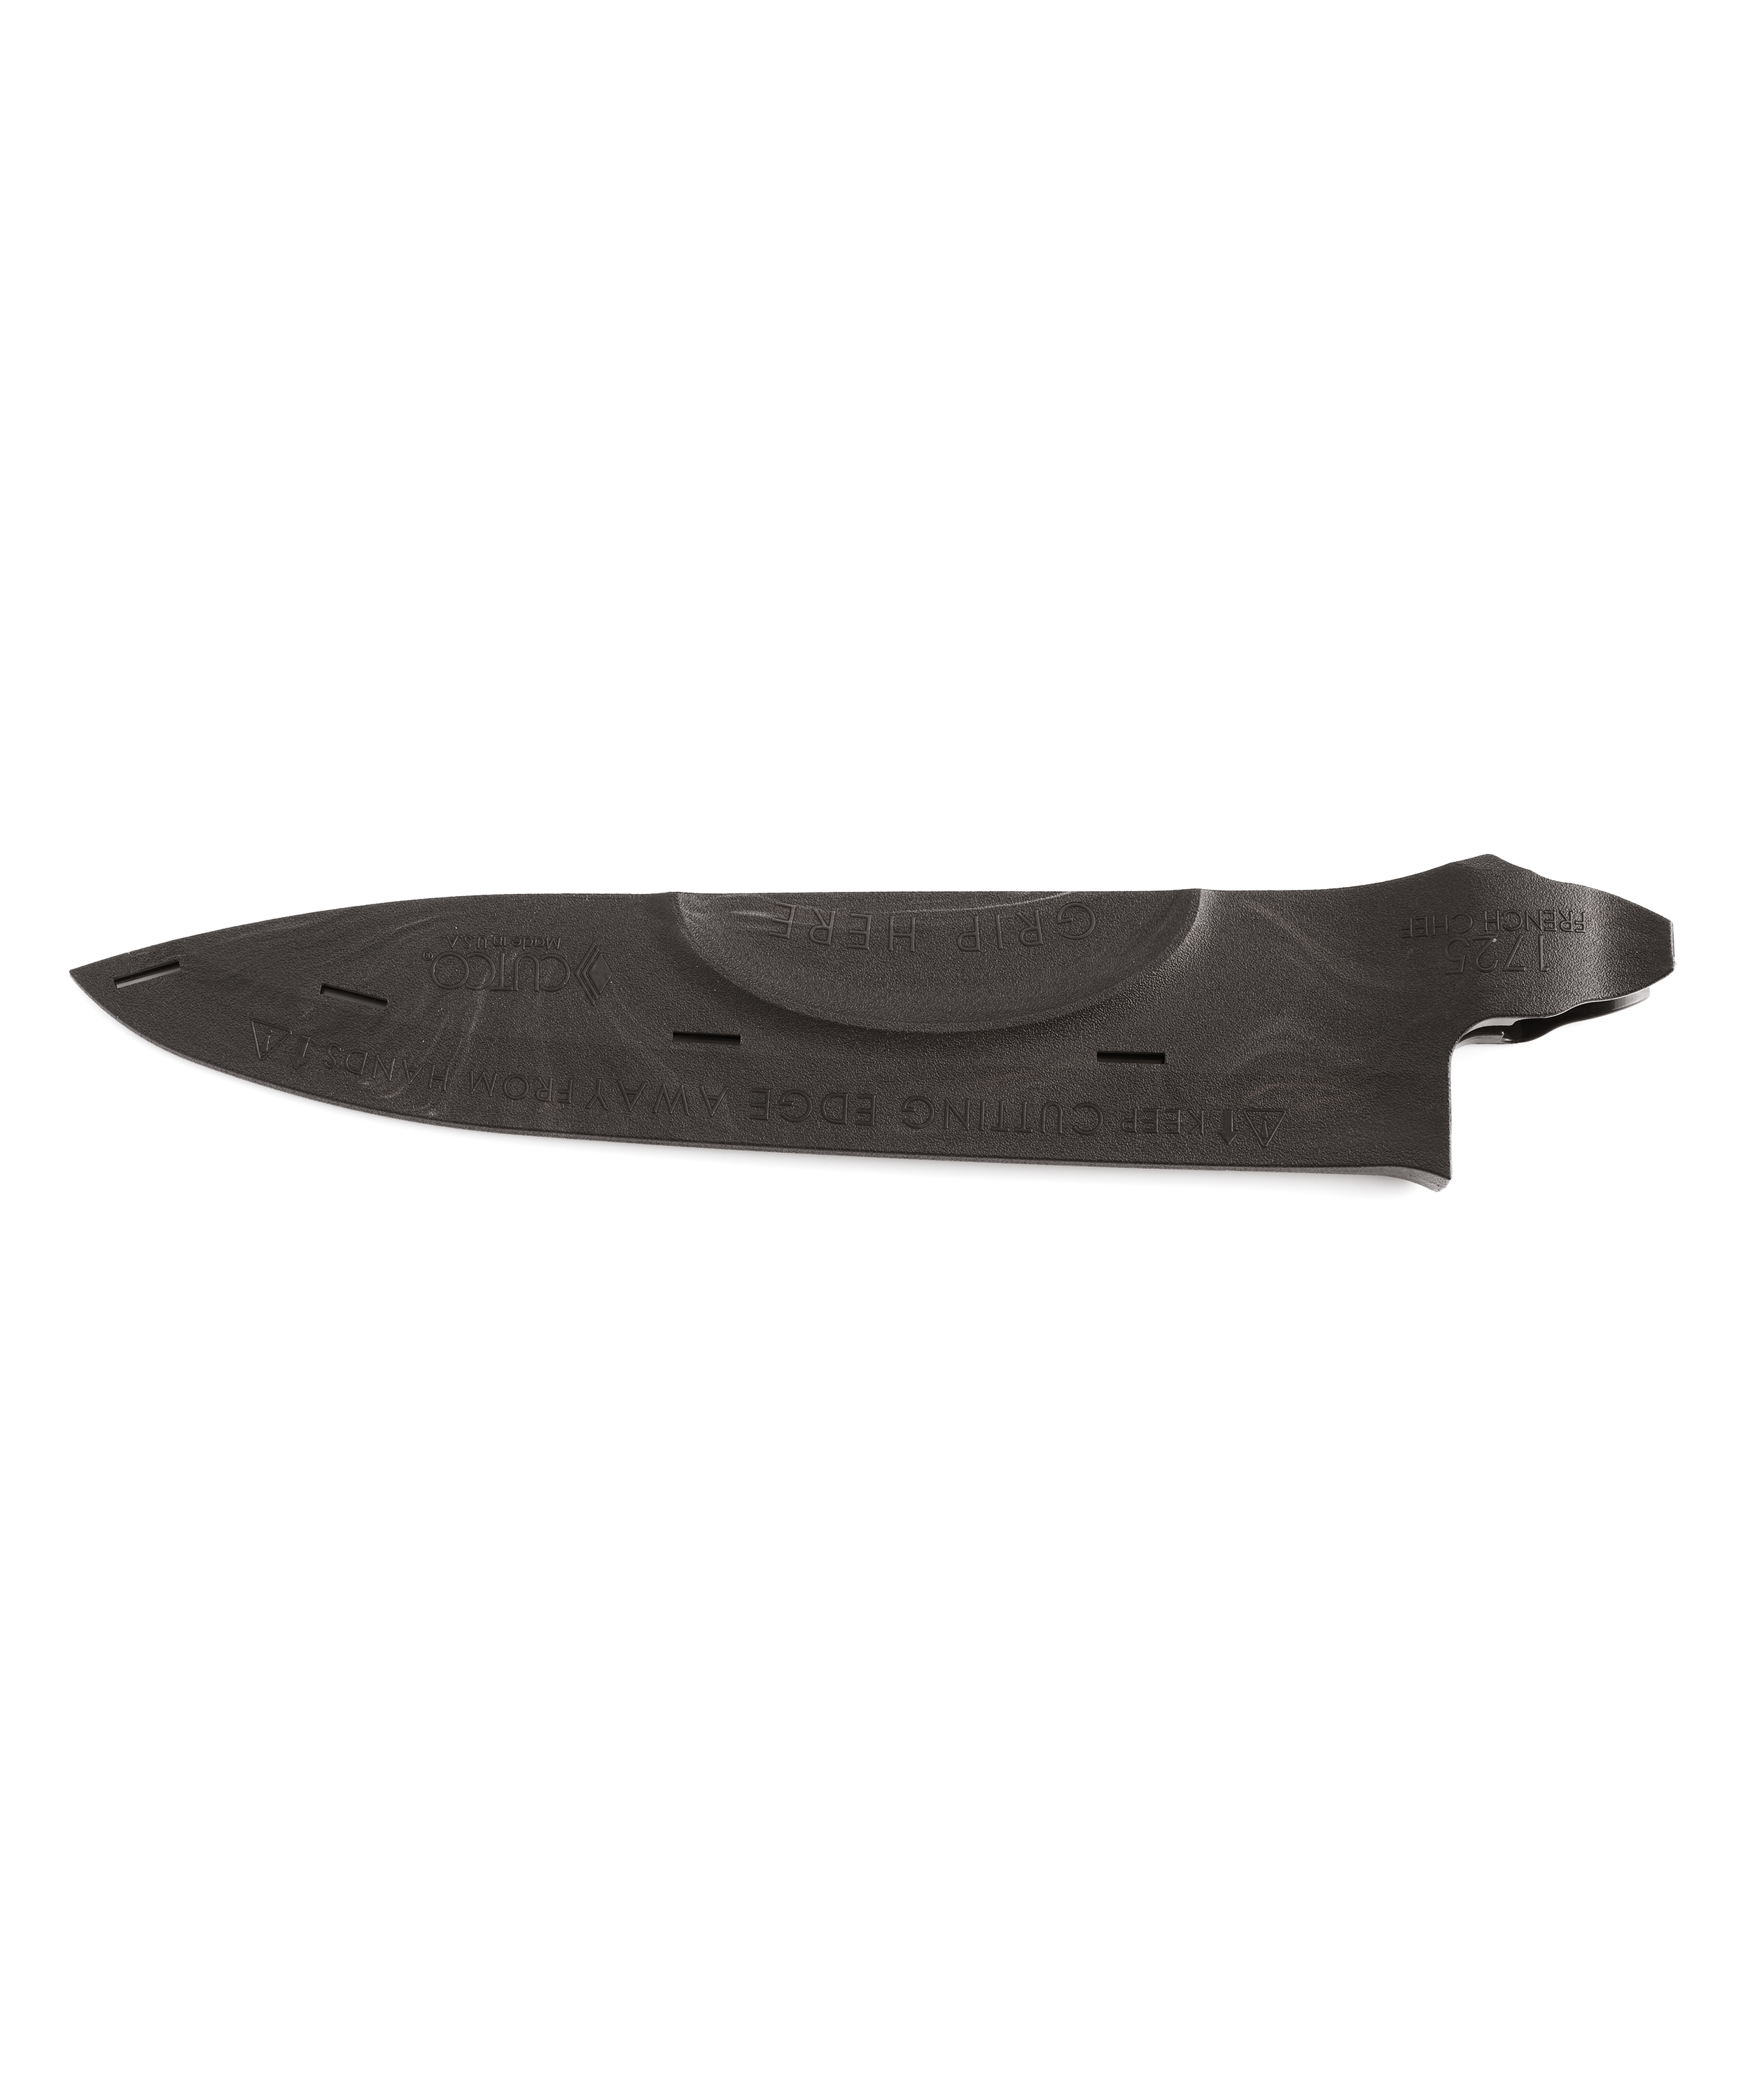 Cutco 1725 9-1/4 inch French Chef's Knife for sale online